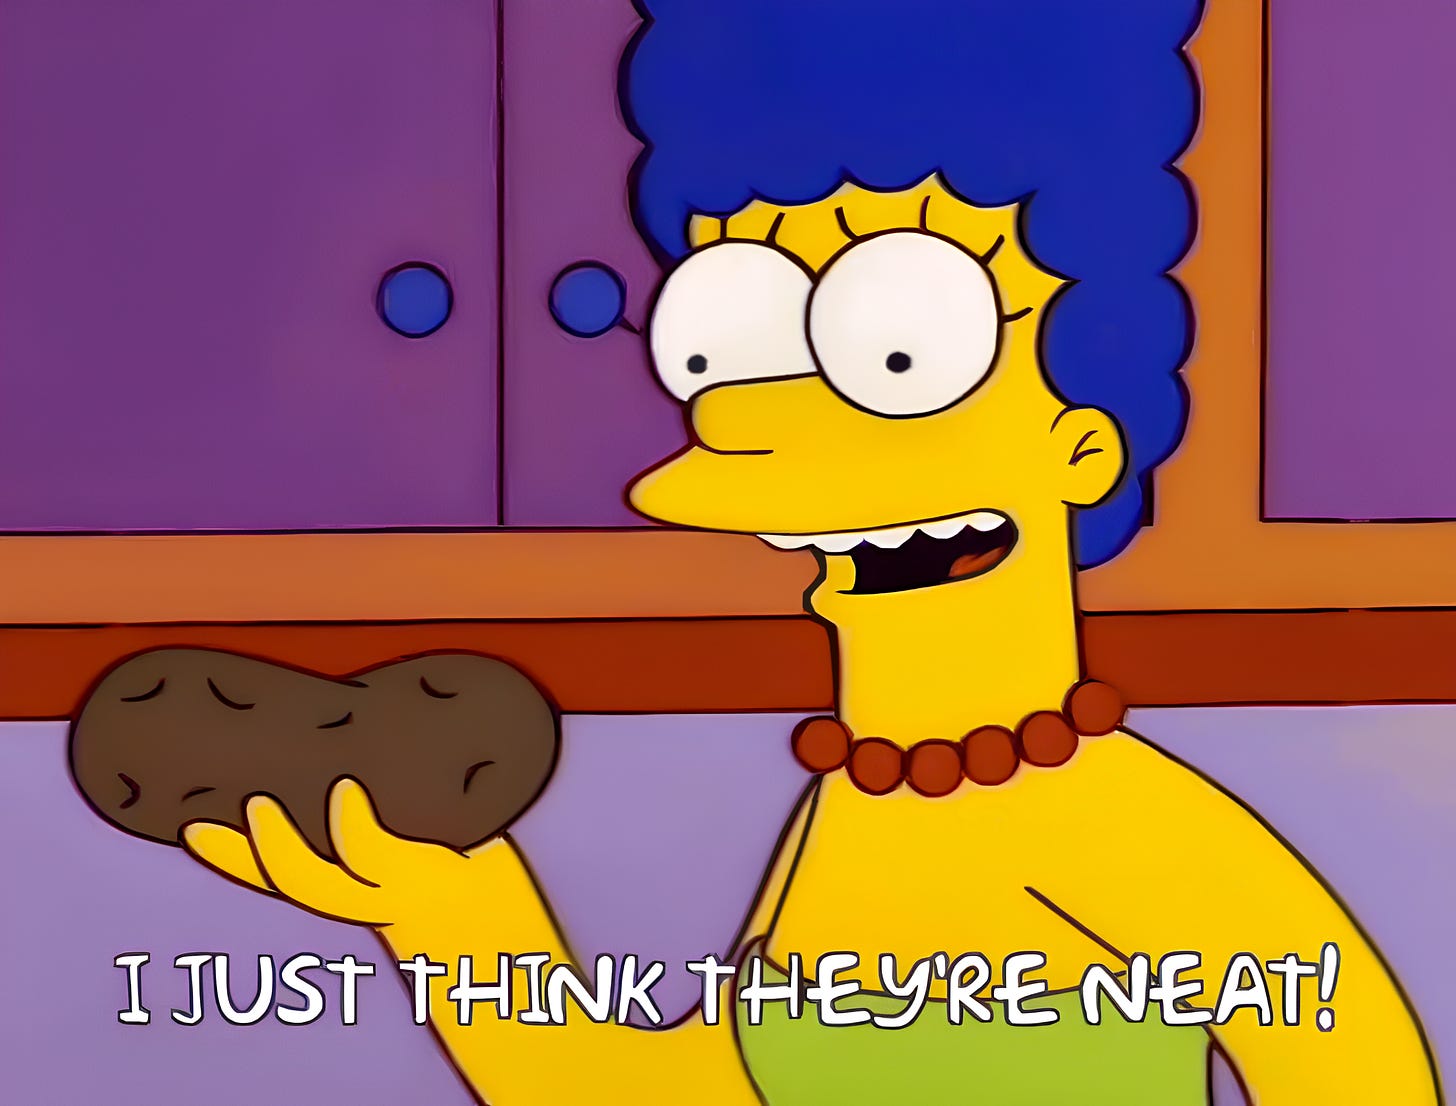 Marge Simpson holding a potato, screencap "I just think they're neat"